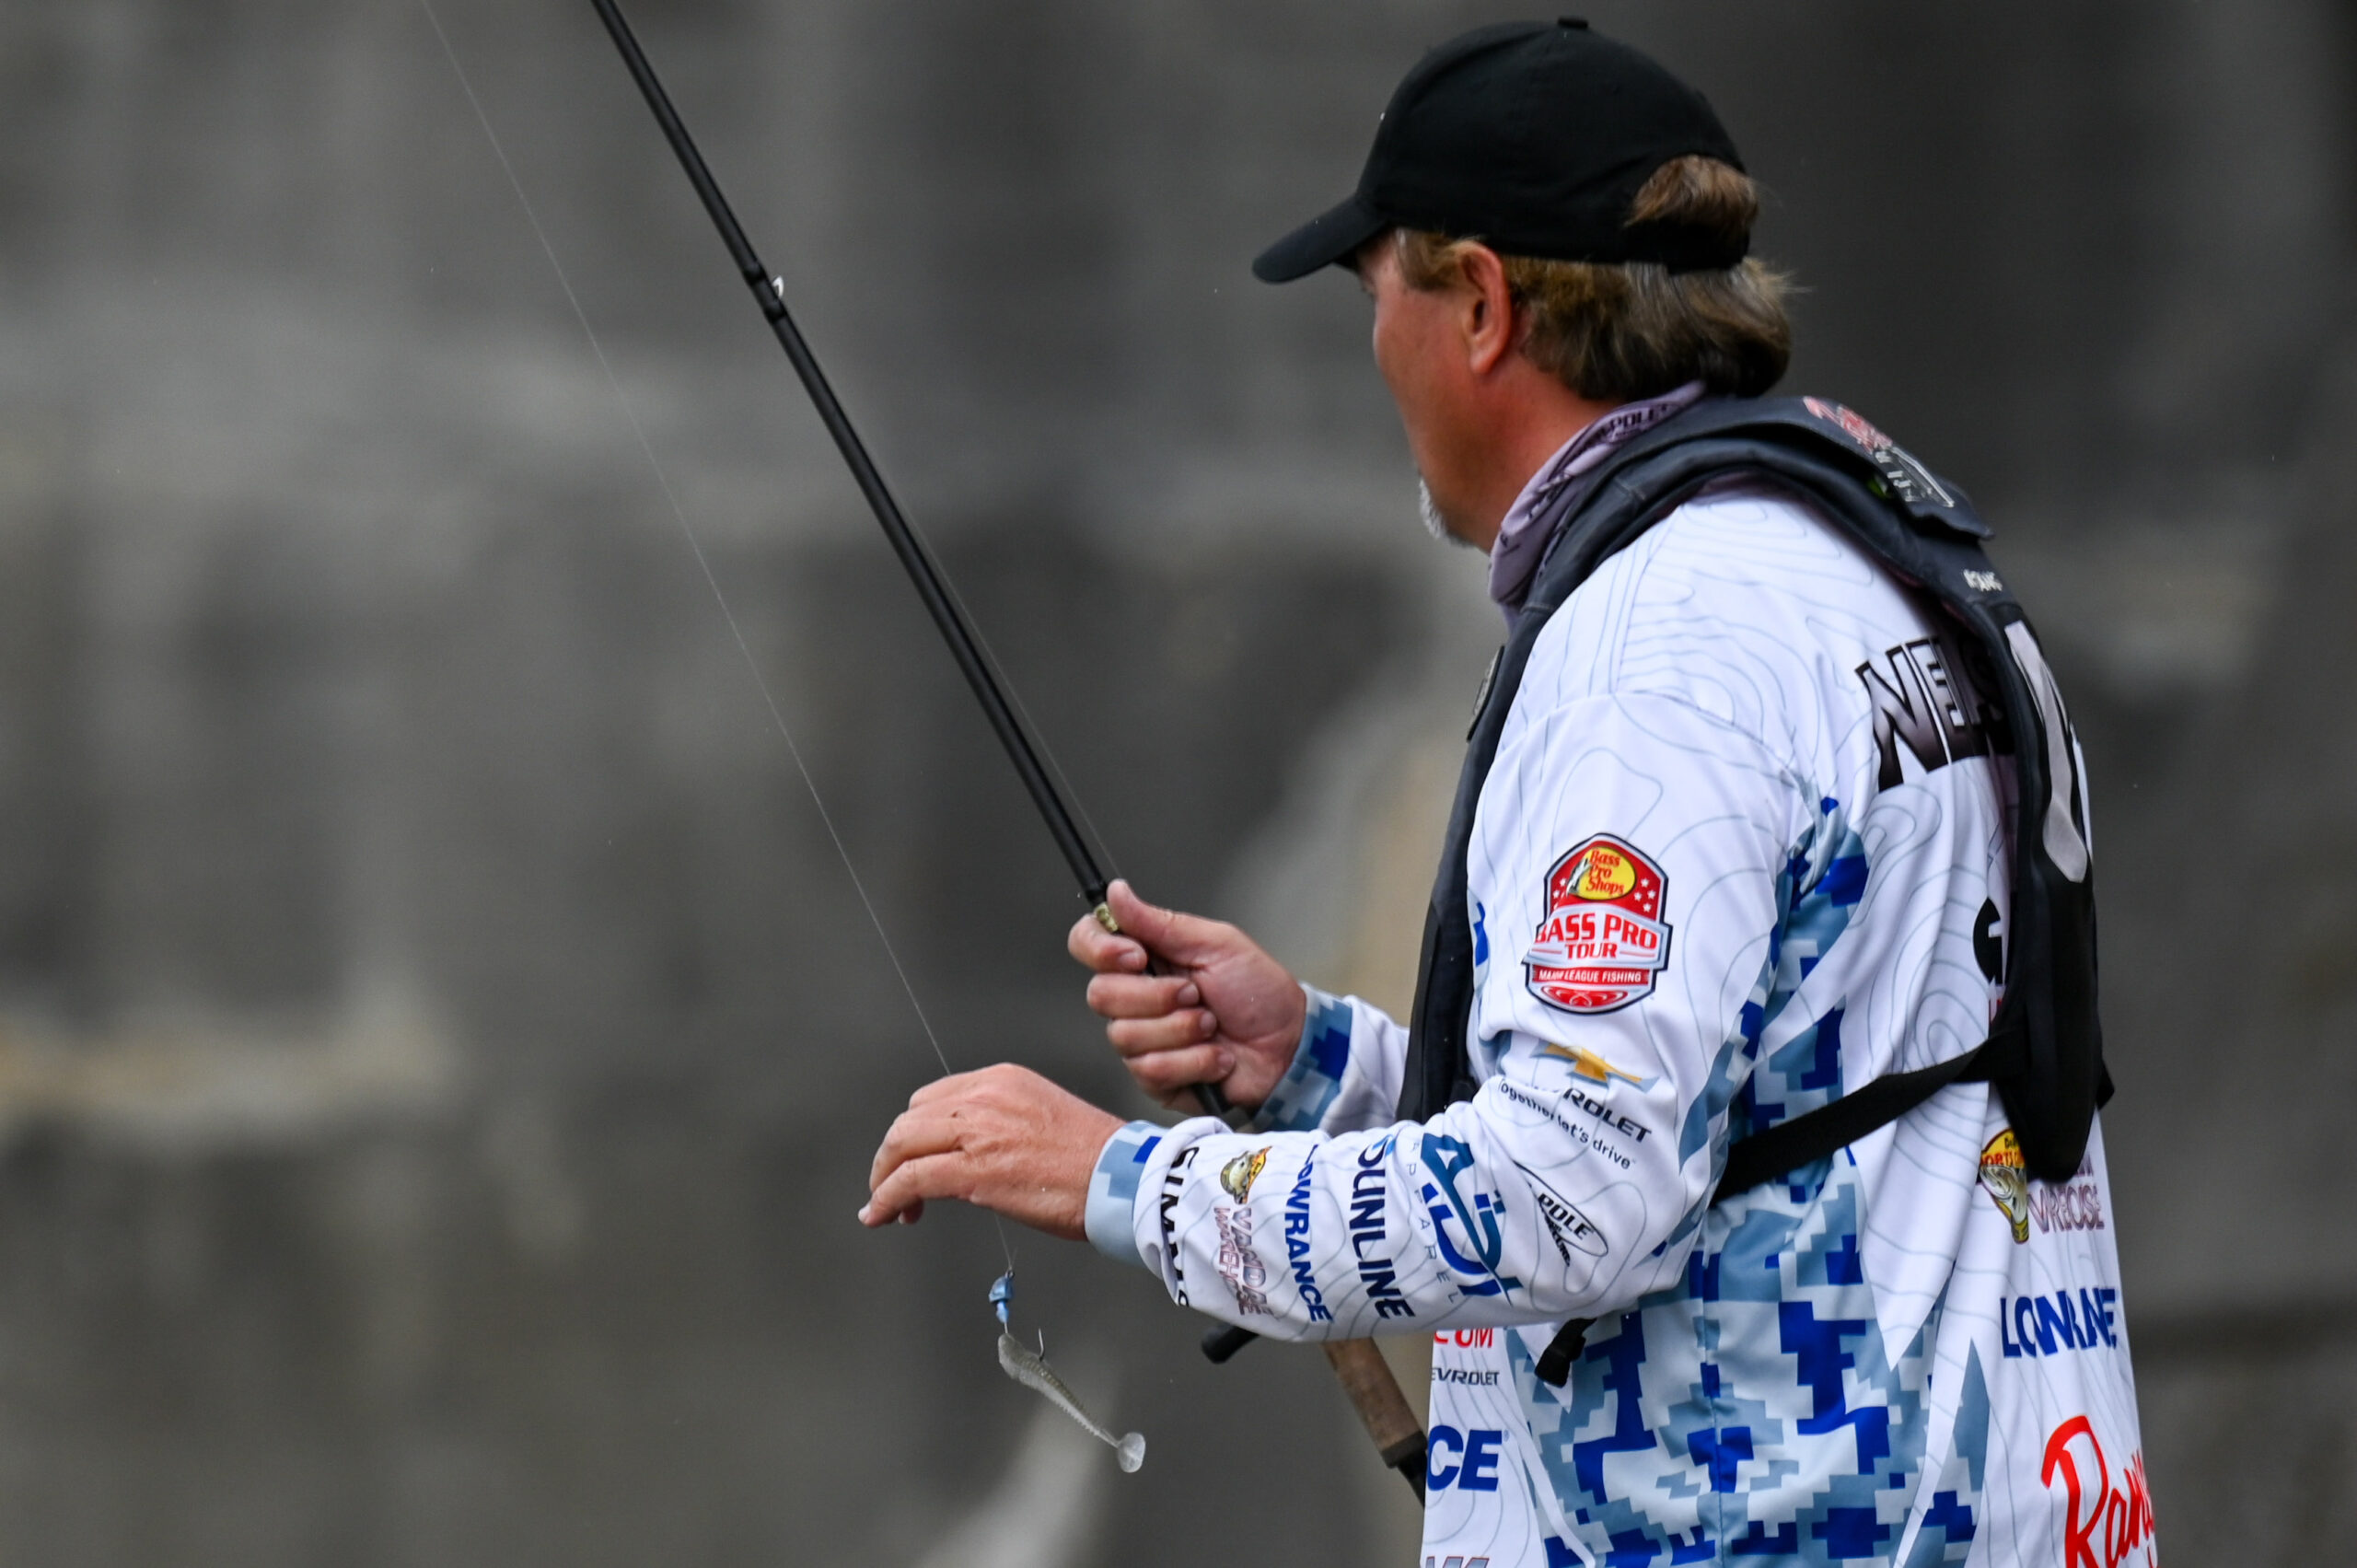 Cliff Pace's Stage Eight Winning Gear - Major League Fishing